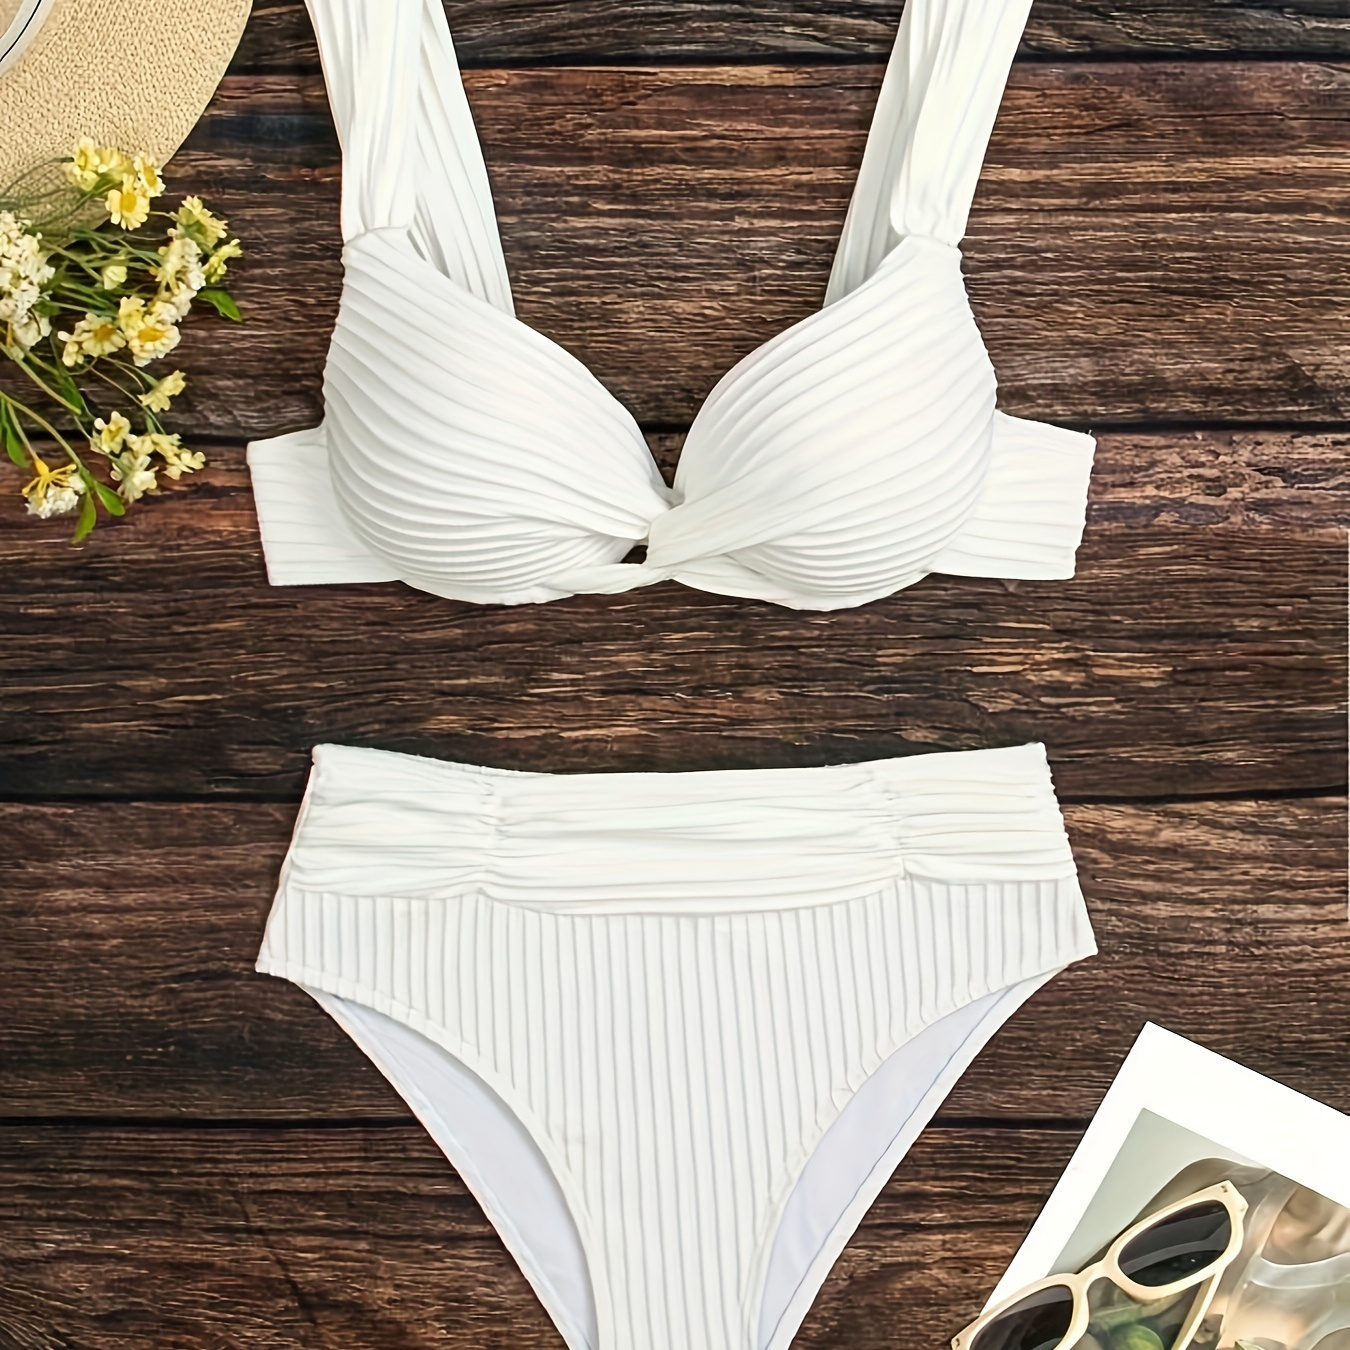 

Textured High-waisted Bikini Set With Hard Cup Underwire, Twist Front Top, White Two-piece Swimsuit, Beachwear, Poolside Fashion